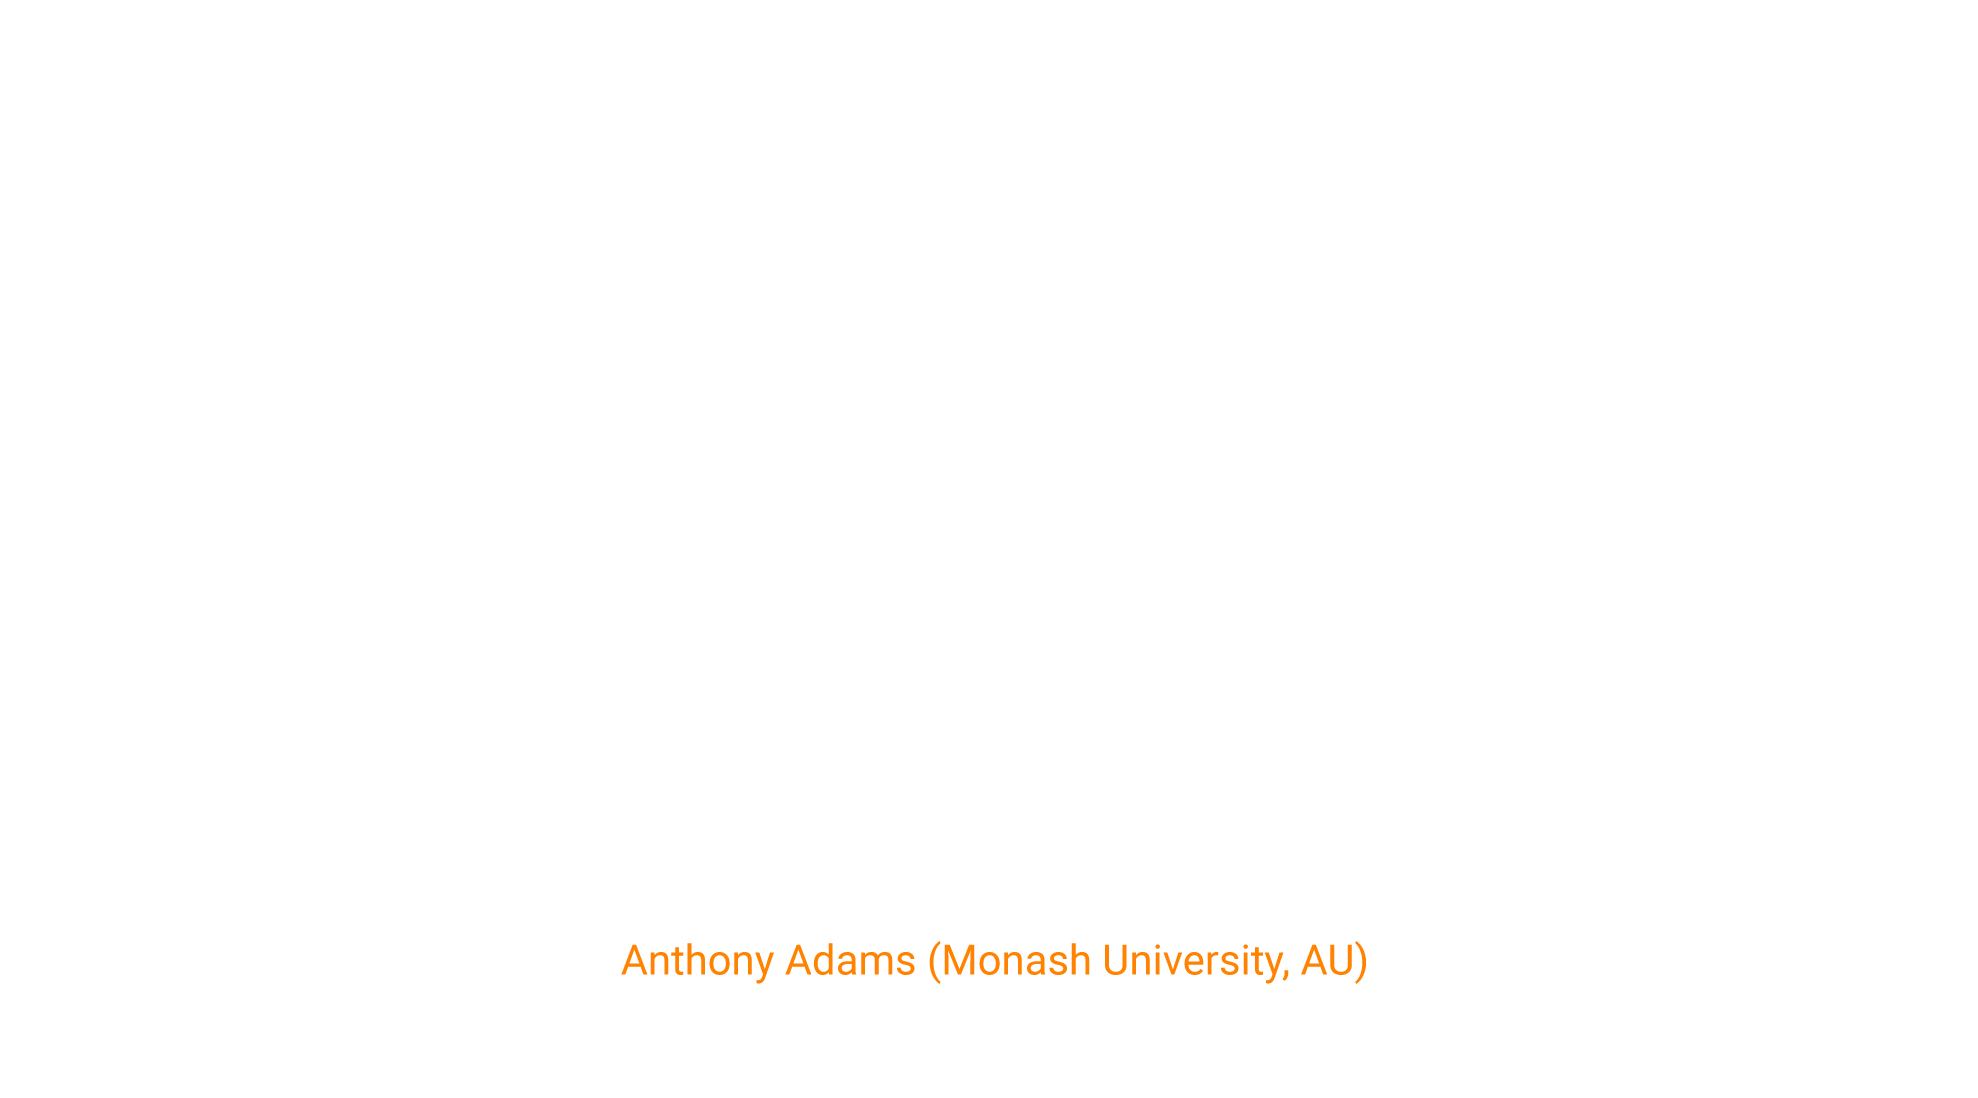 Cybersecurity Maturity in the Pacific Islands - Integrating CERT Services in a Regional Framework